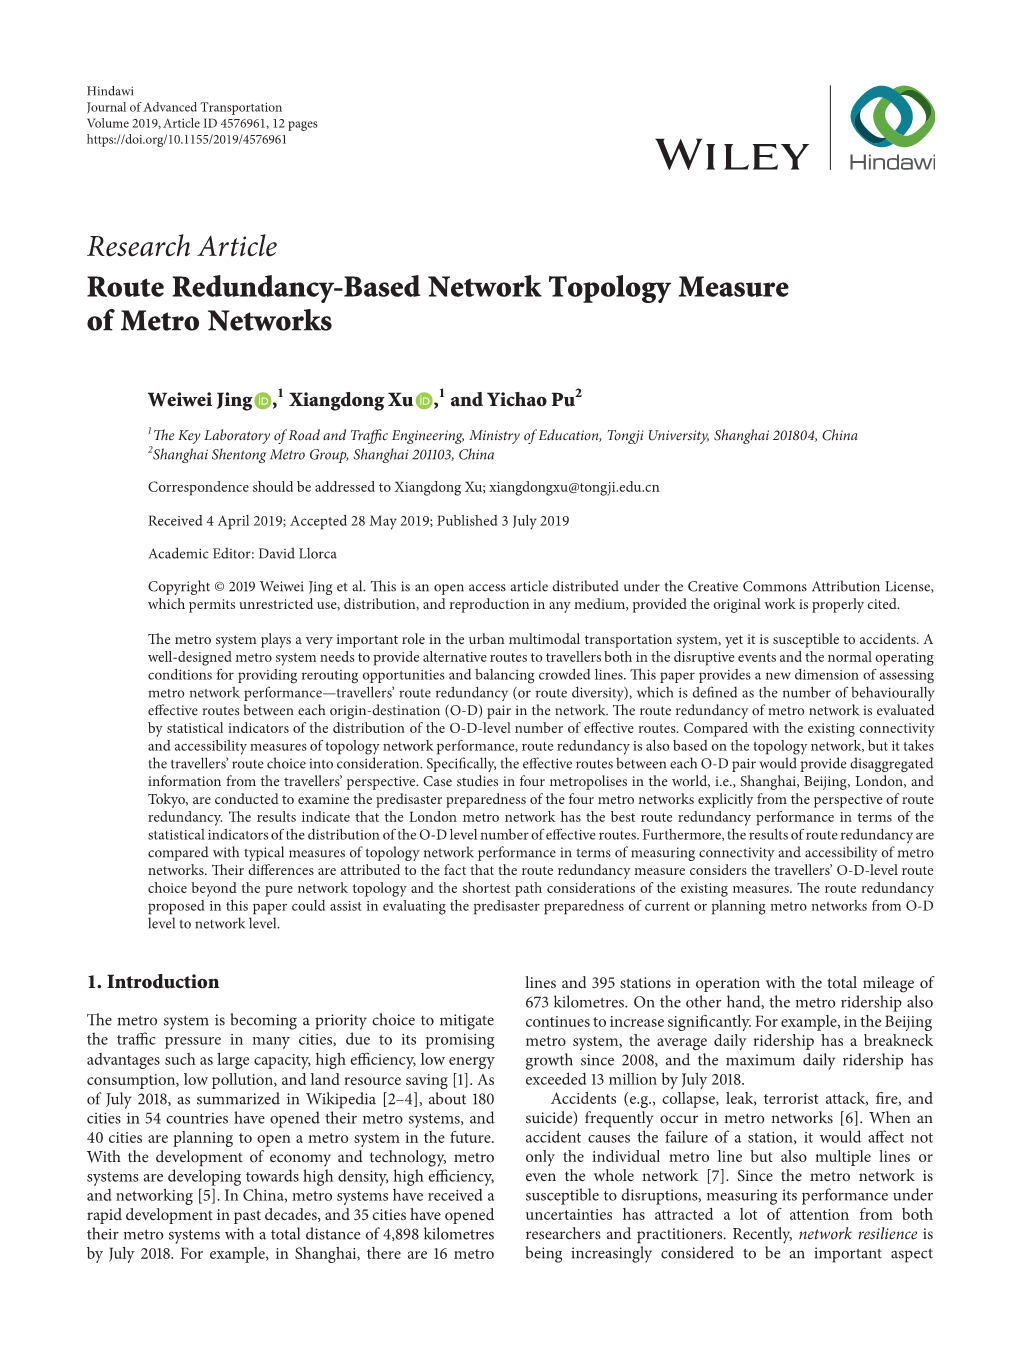 Research Article Route Redundancy-Based Network Topology Measure of Metro Networks